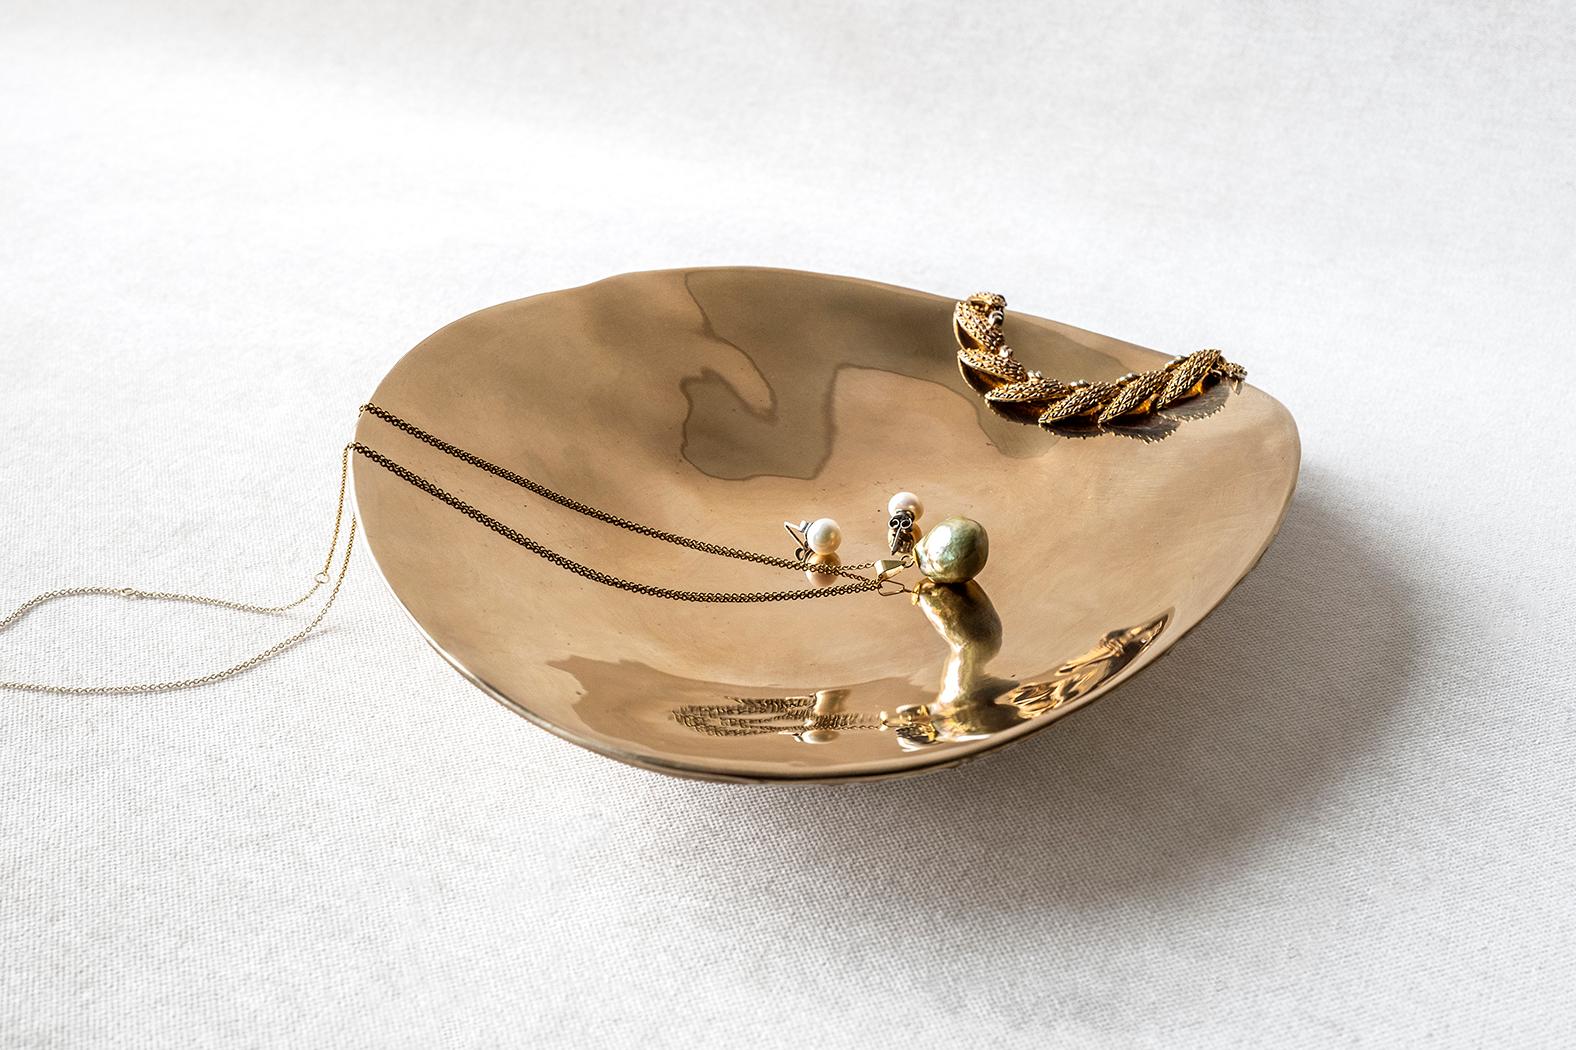 Set of 2 gorgeous bronze trays.
This stunning solid bronze dish is an interior embellishment.
The organic shape is sculpted by hand and polished after casting for a smooth shiny surface.
Inspired by the perfectly imperfect shapes in nature, this